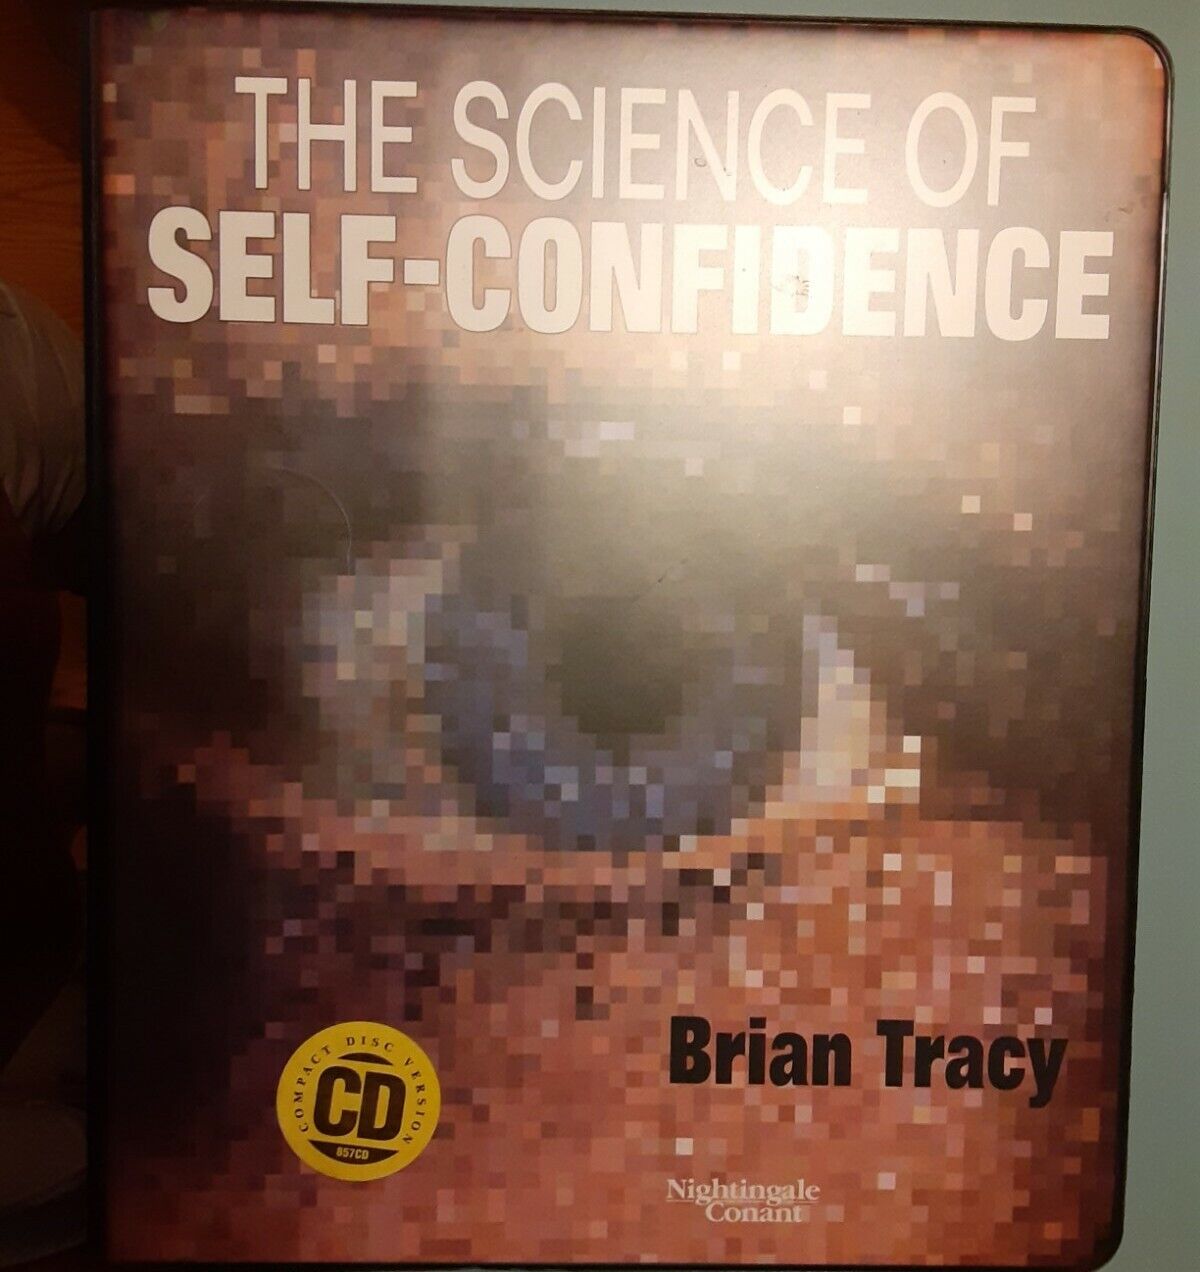 Brian Tracy The Science Of Self Confidence (6 Cd Set) Nightingale Conant - Used